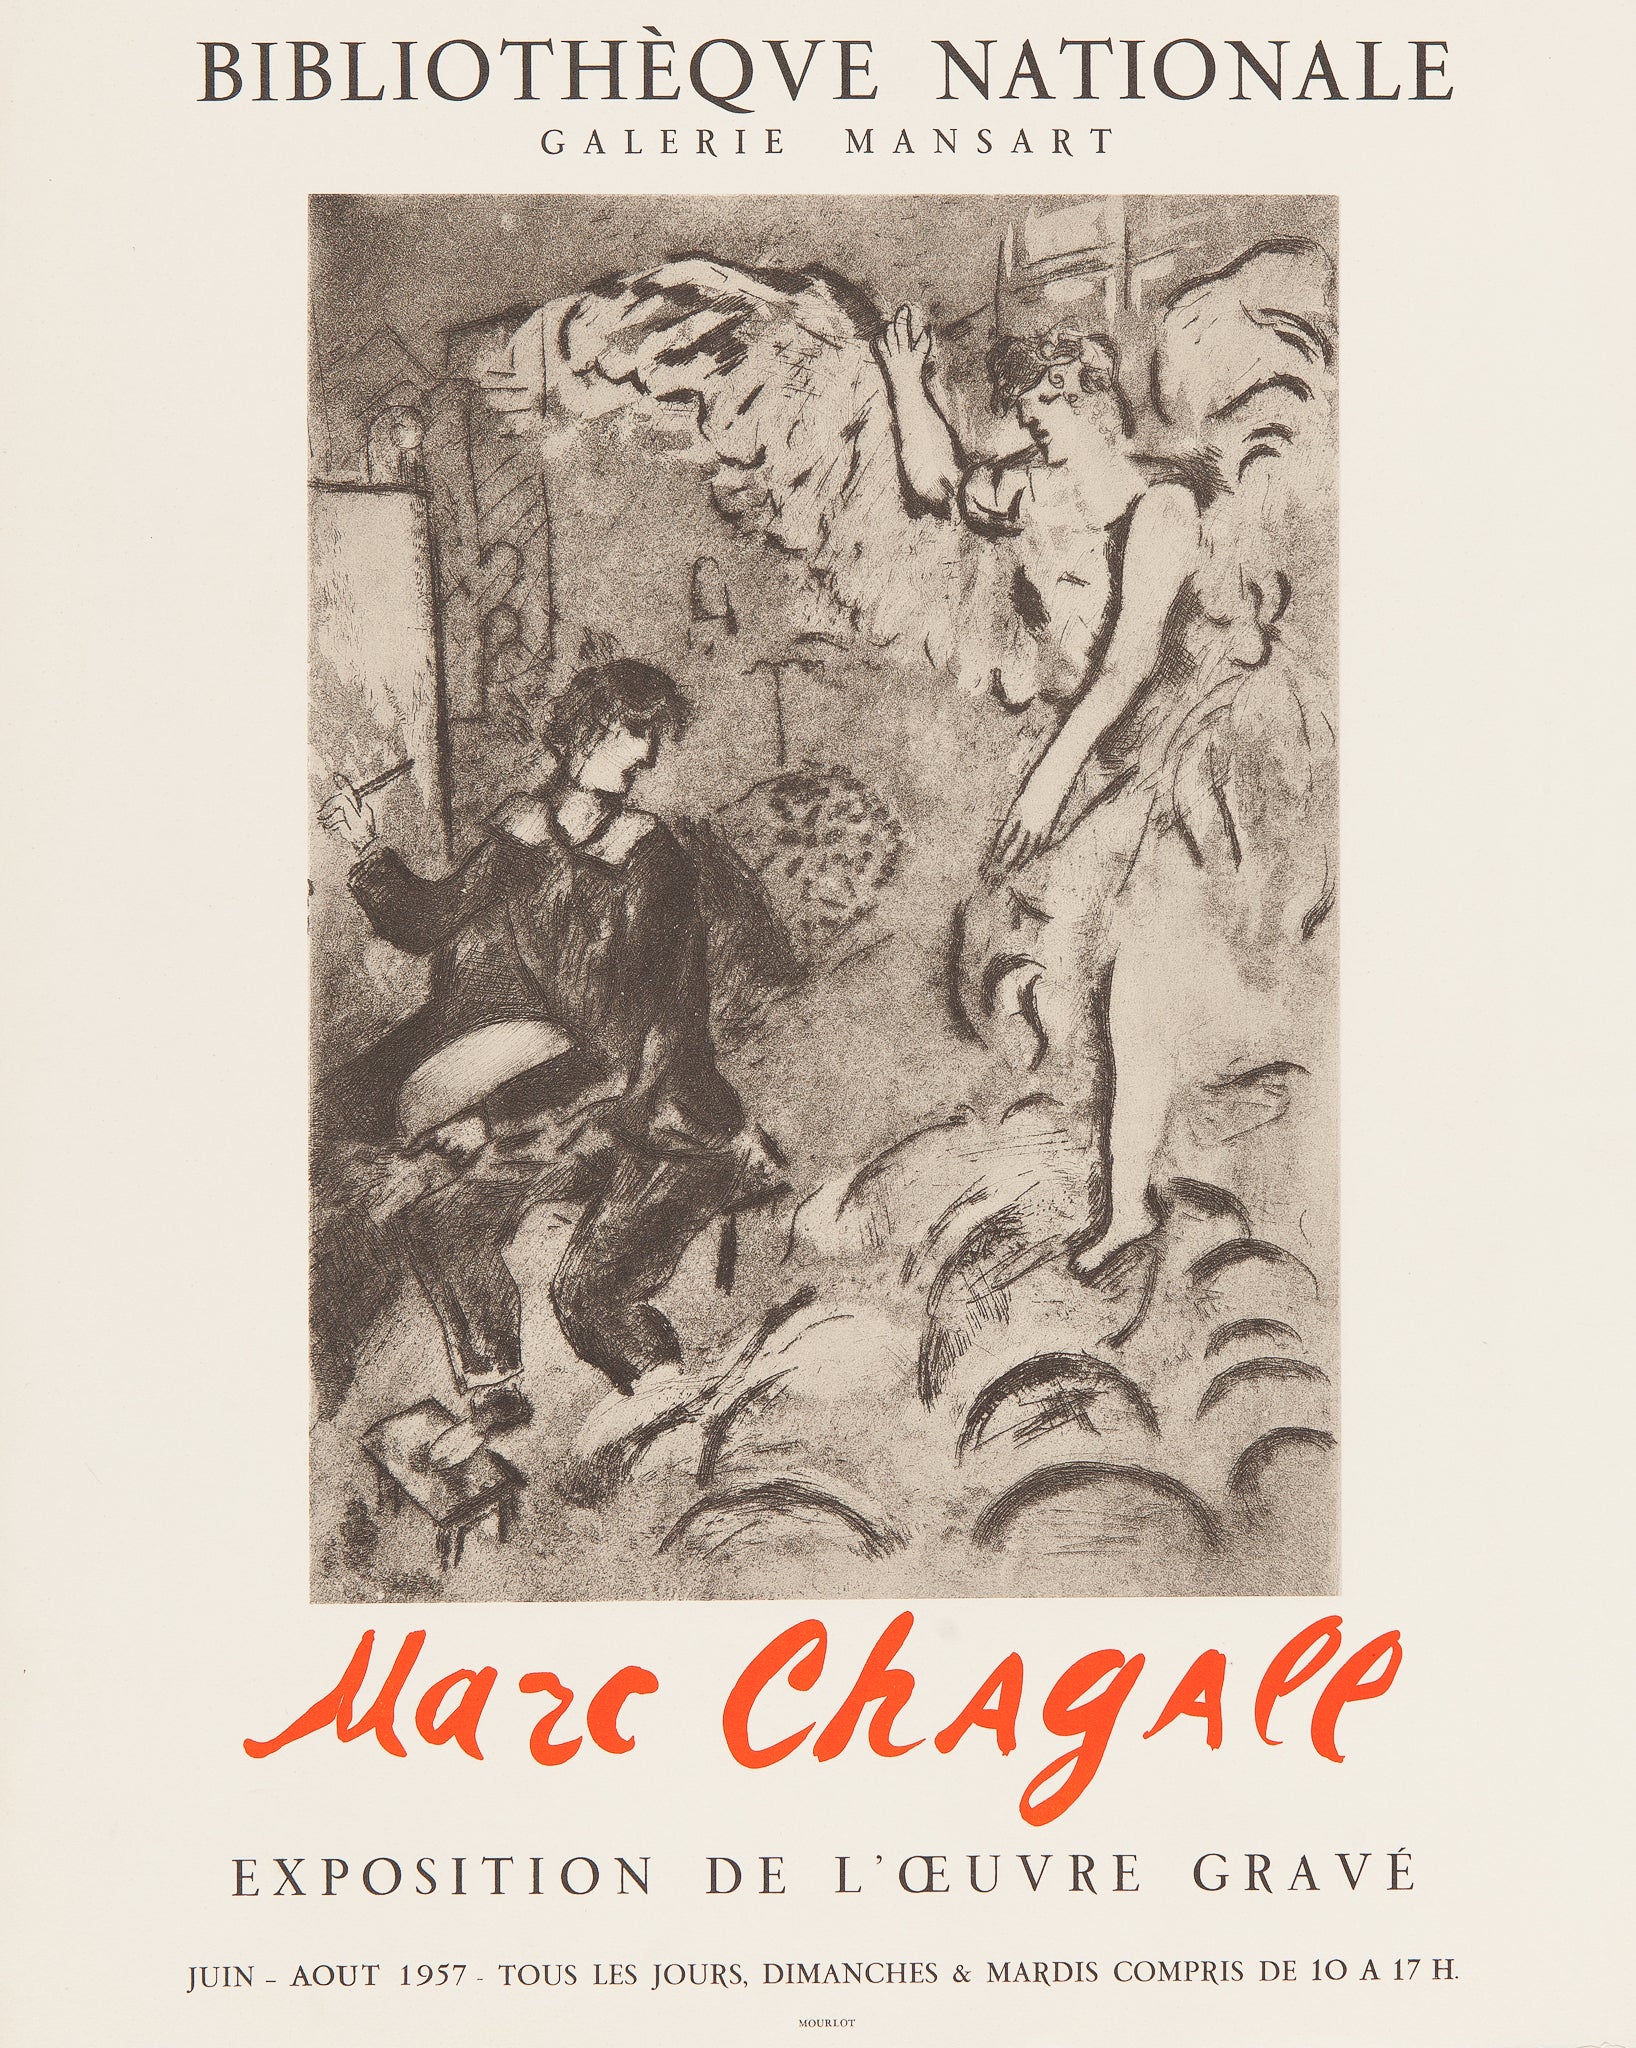 Chagall, affiches, art, poster, artposter, litho, marc chagall, bibliotheque